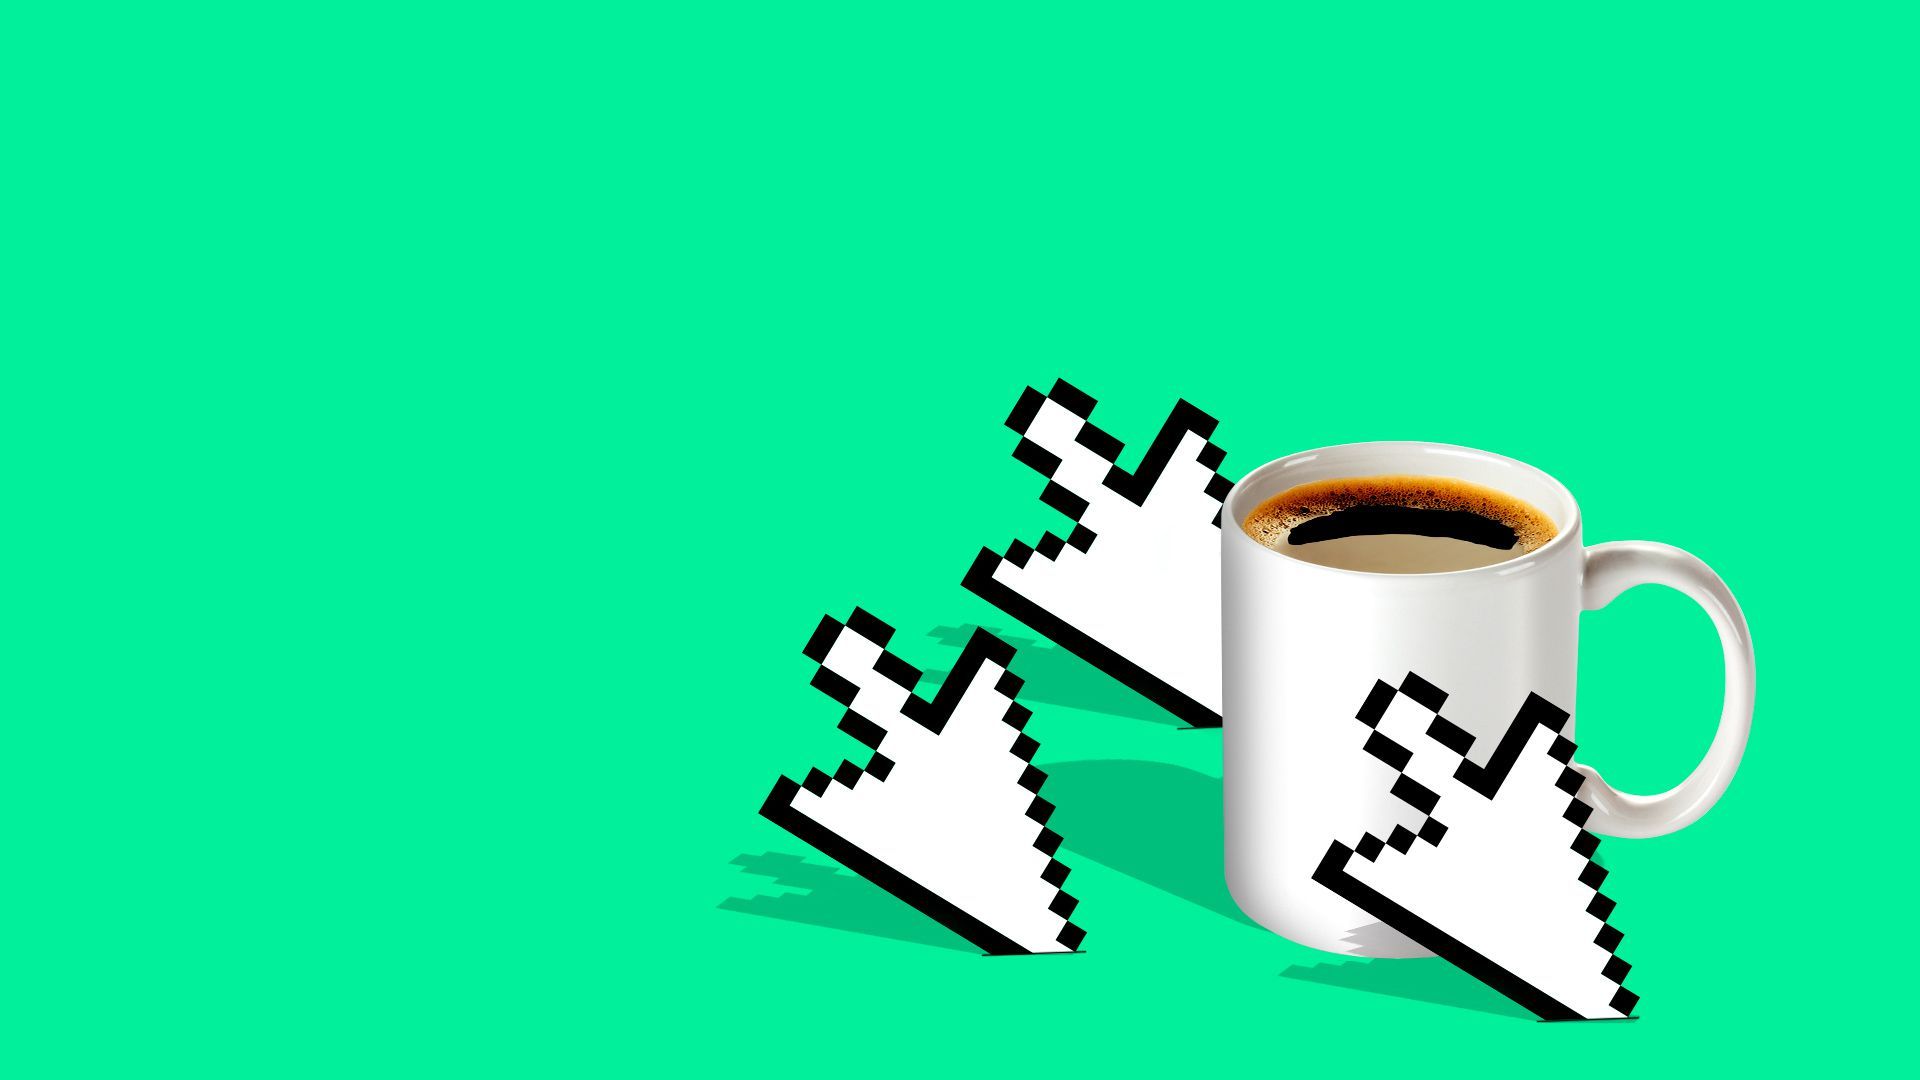 Illustration of a coffee mug being attacked by cursors. 